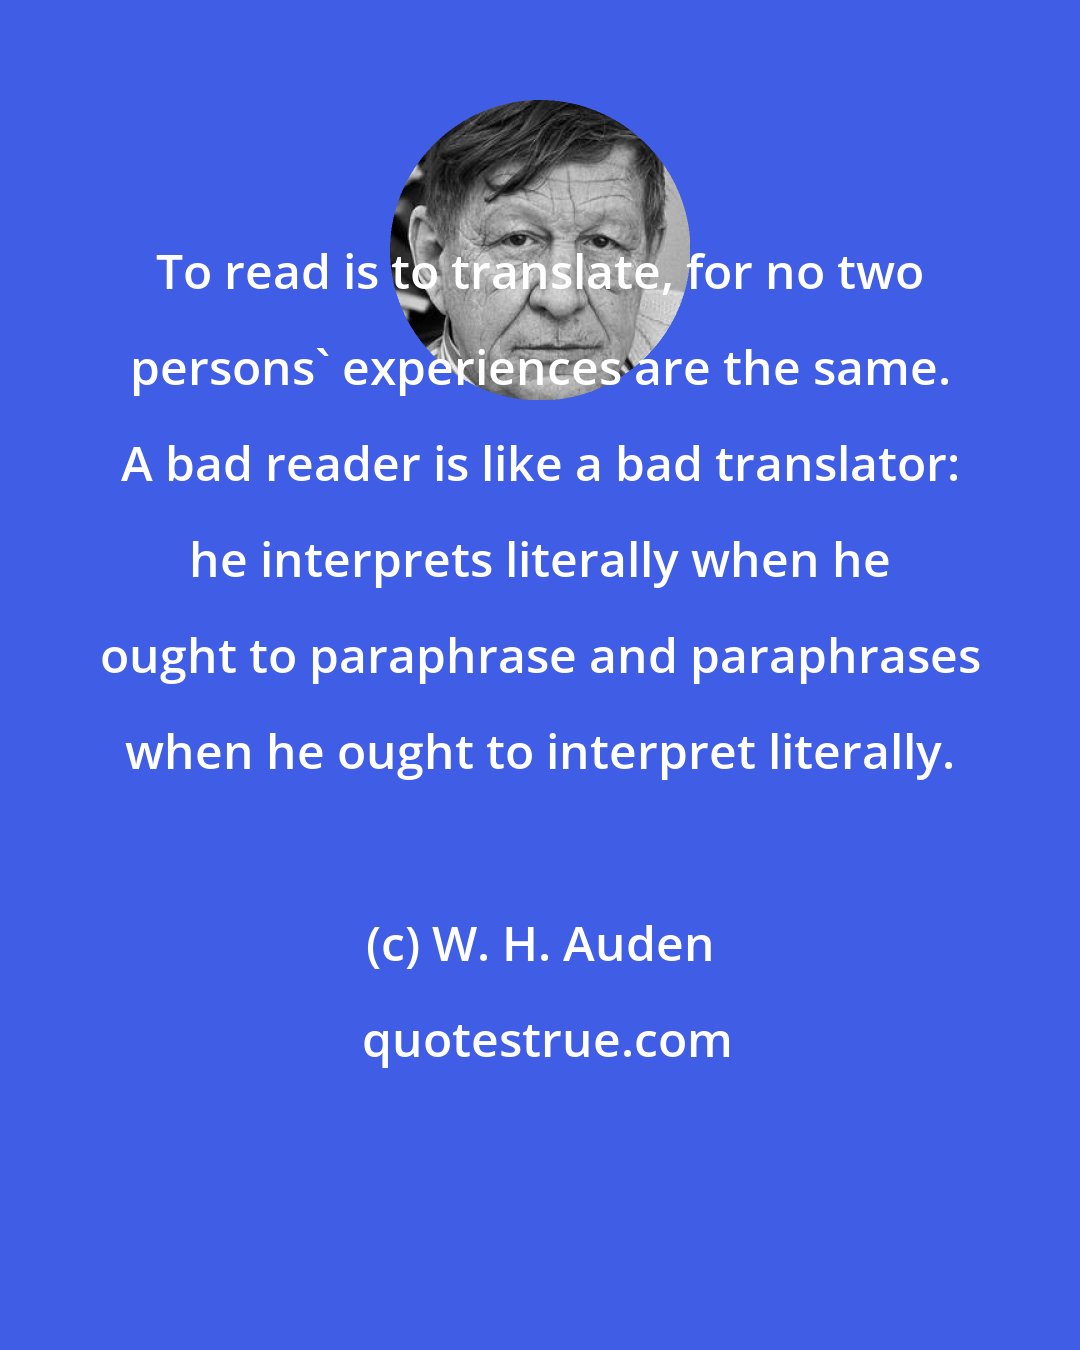 W. H. Auden: To read is to translate, for no two persons' experiences are the same. A bad reader is like a bad translator: he interprets literally when he ought to paraphrase and paraphrases when he ought to interpret literally.